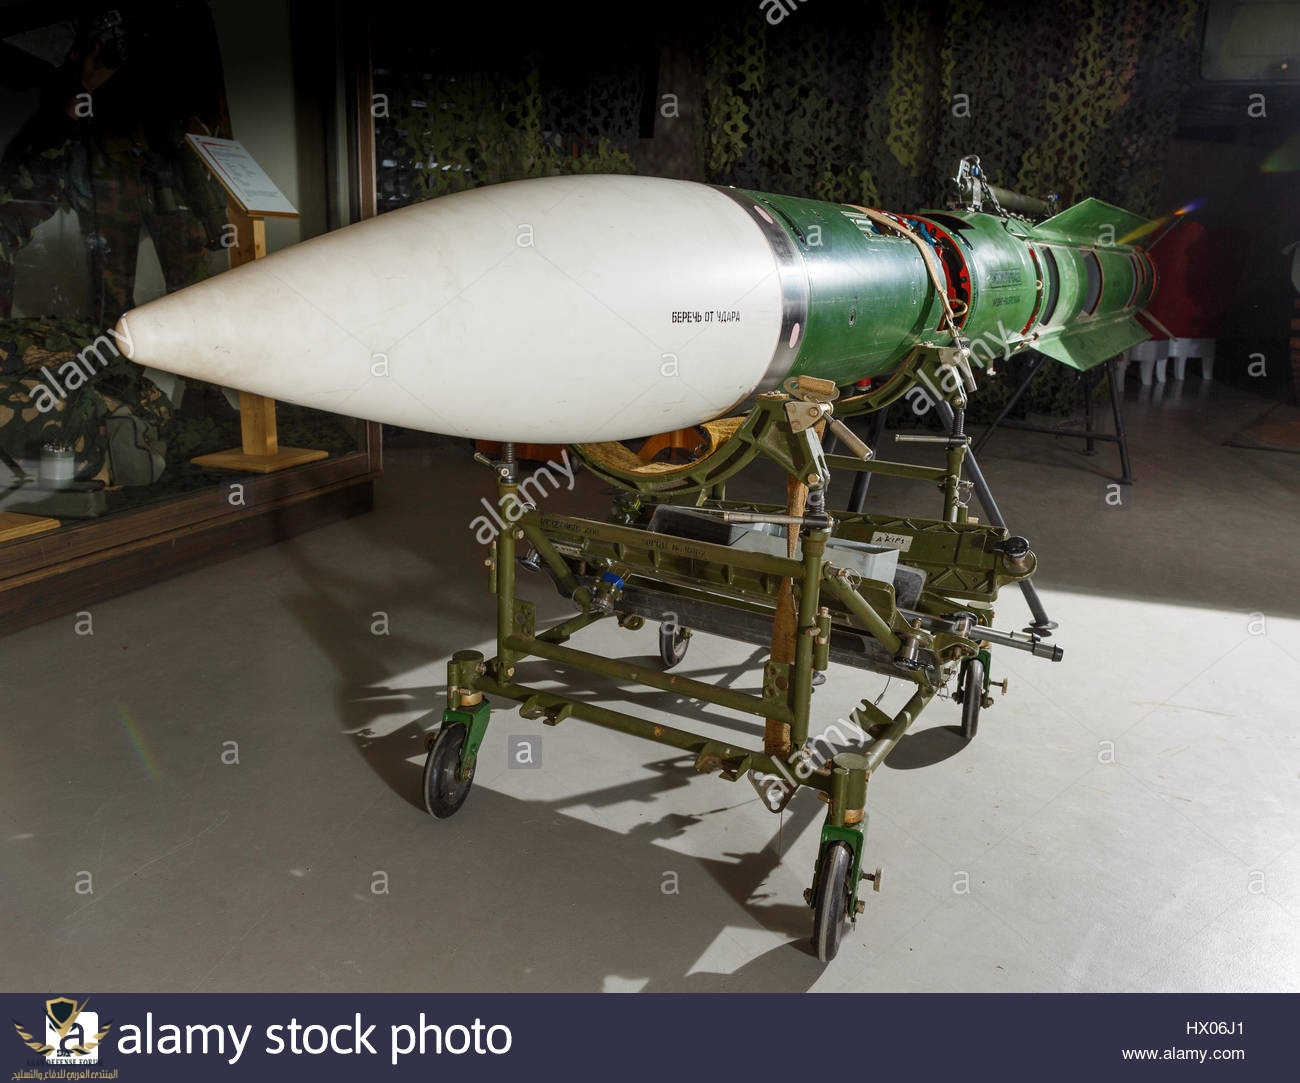 instruction-version-of-the-buk-m1-surface-to-air-missile-on-display-HX06J1.jpg